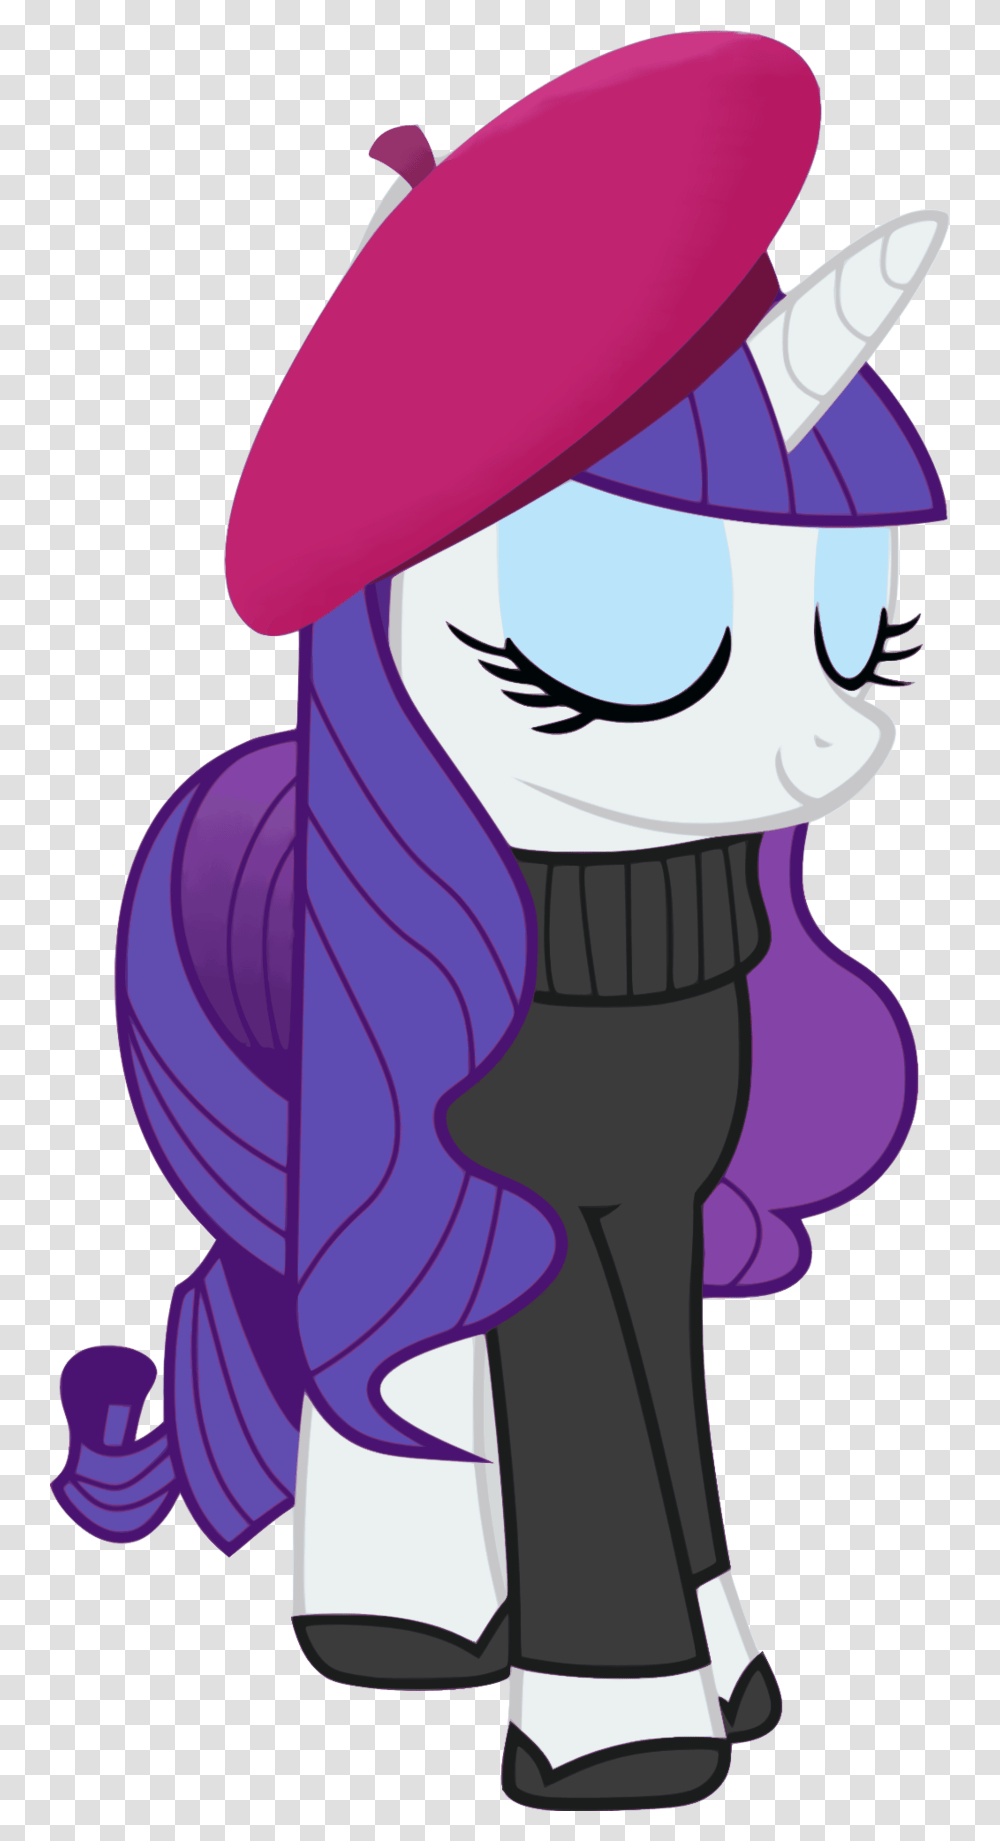 Rarity The Unicorn Images Rarity Vectors Hd Wallpaper Mlp French Rarity, Light, Sunglasses, Accessories Transparent Png